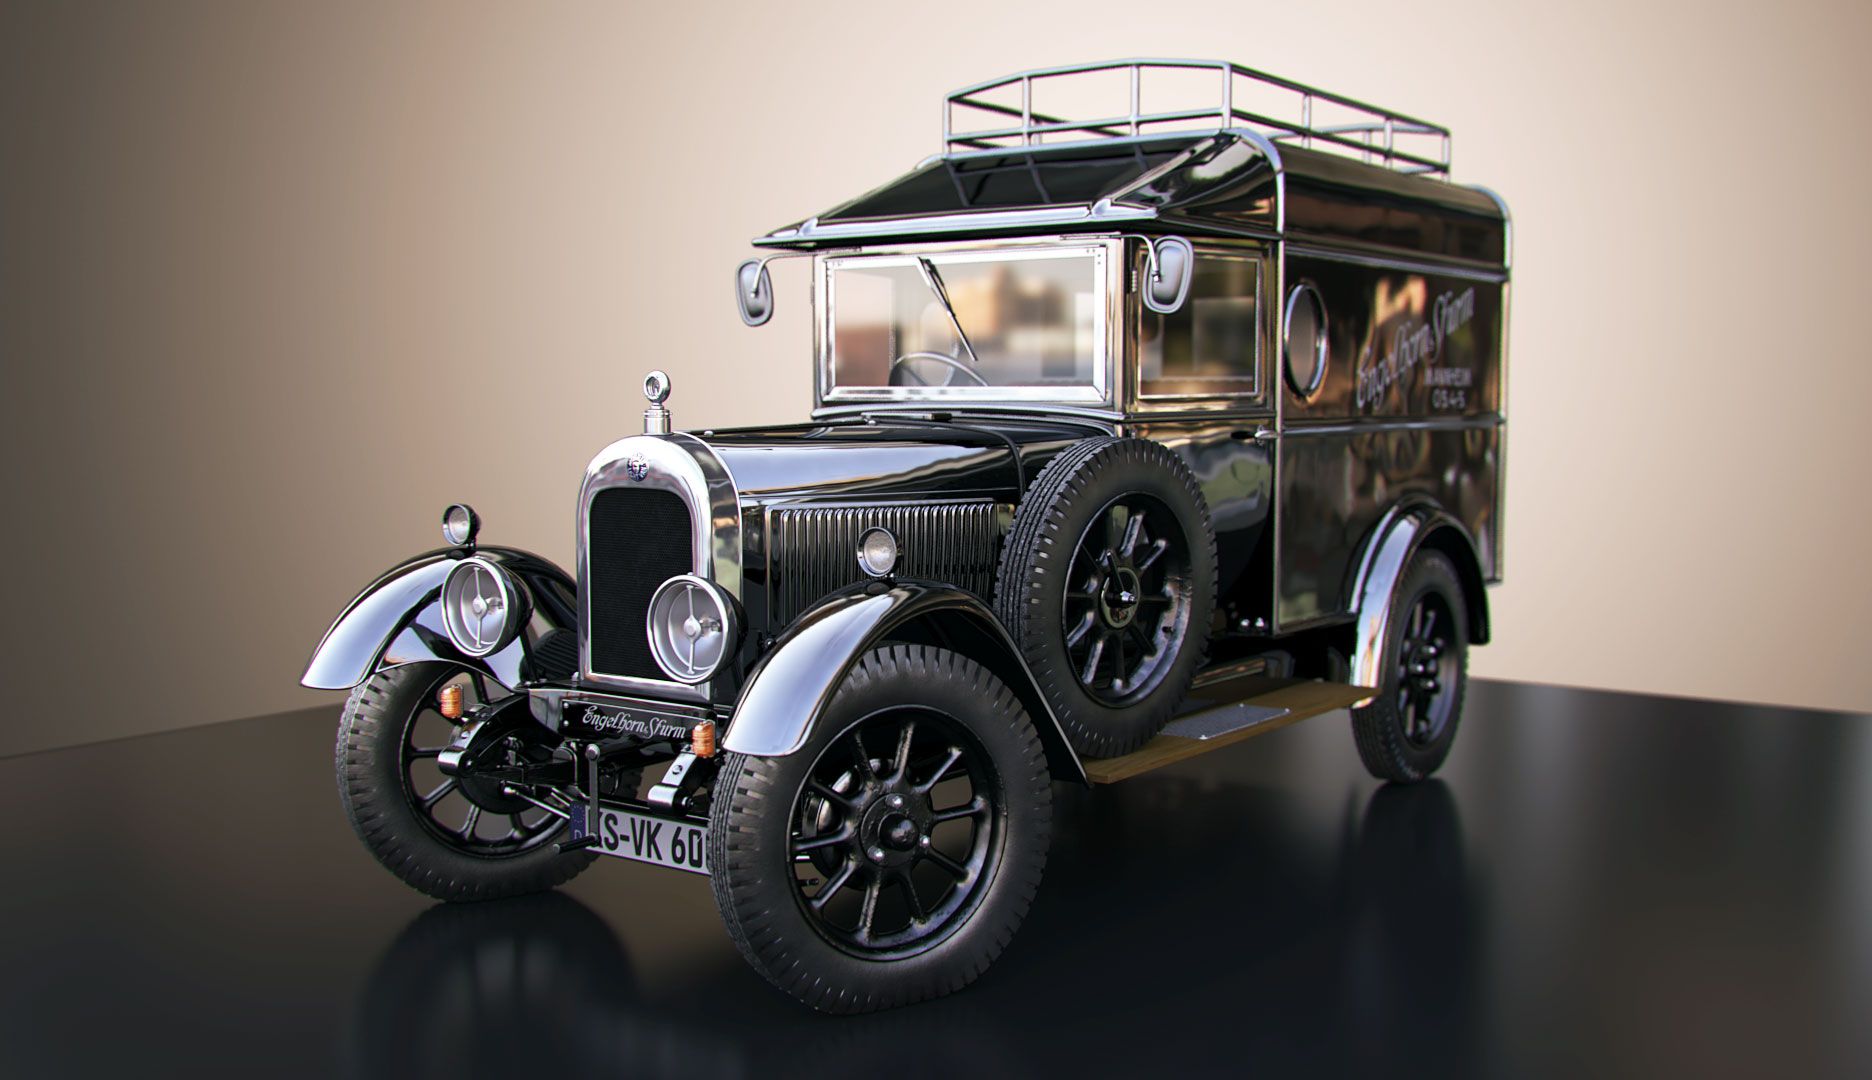 3D Auto Modell oldtimer. Rigging, Rendering, Animation